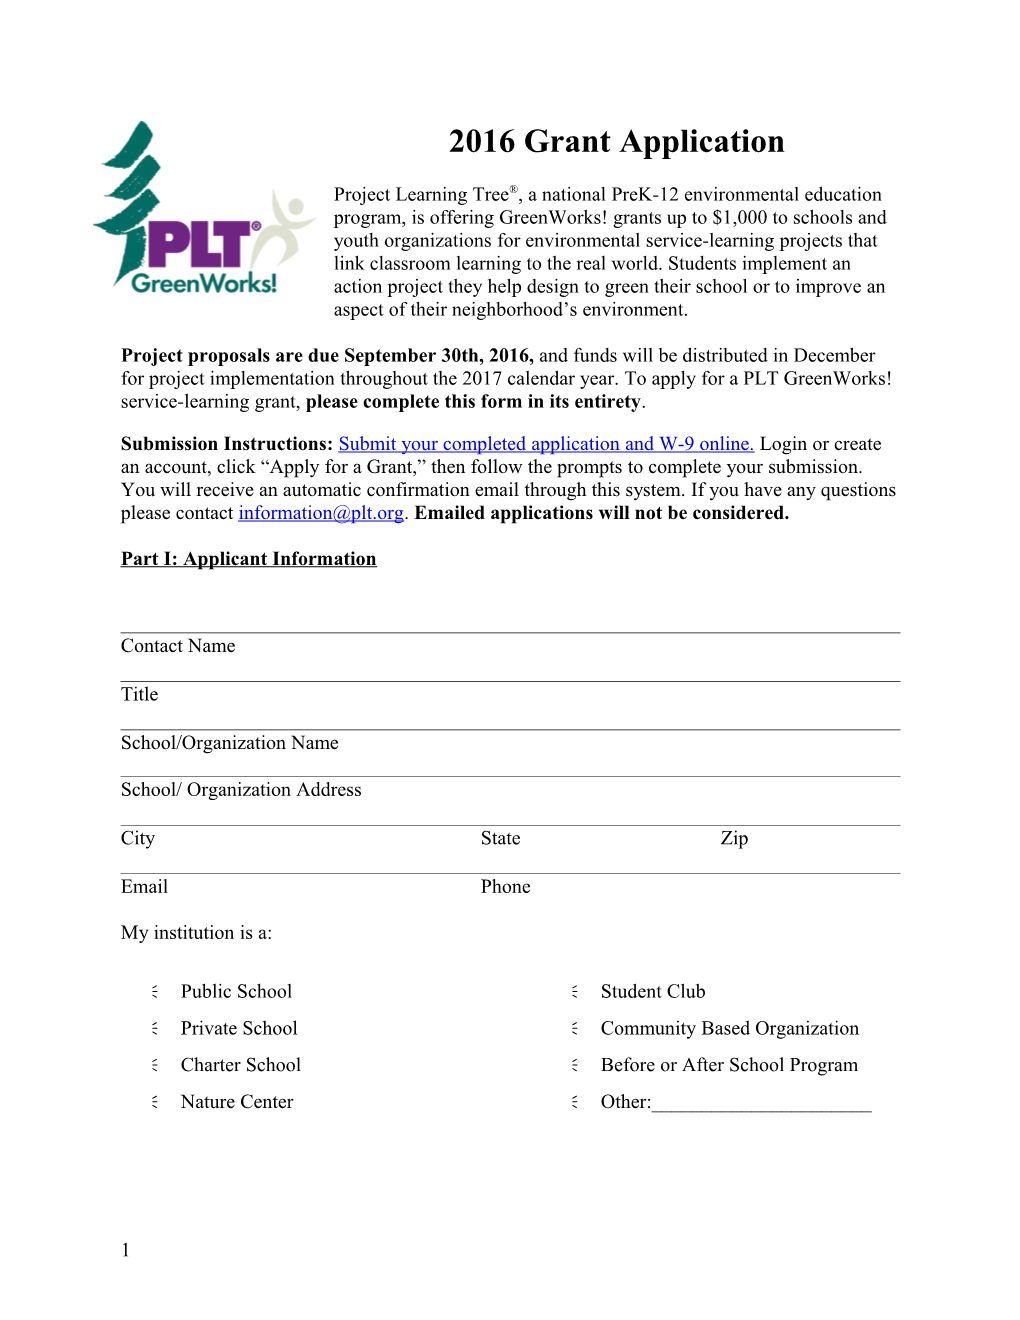 Project Learning Tree , a National Prek-12 Environmental Education Program,Is